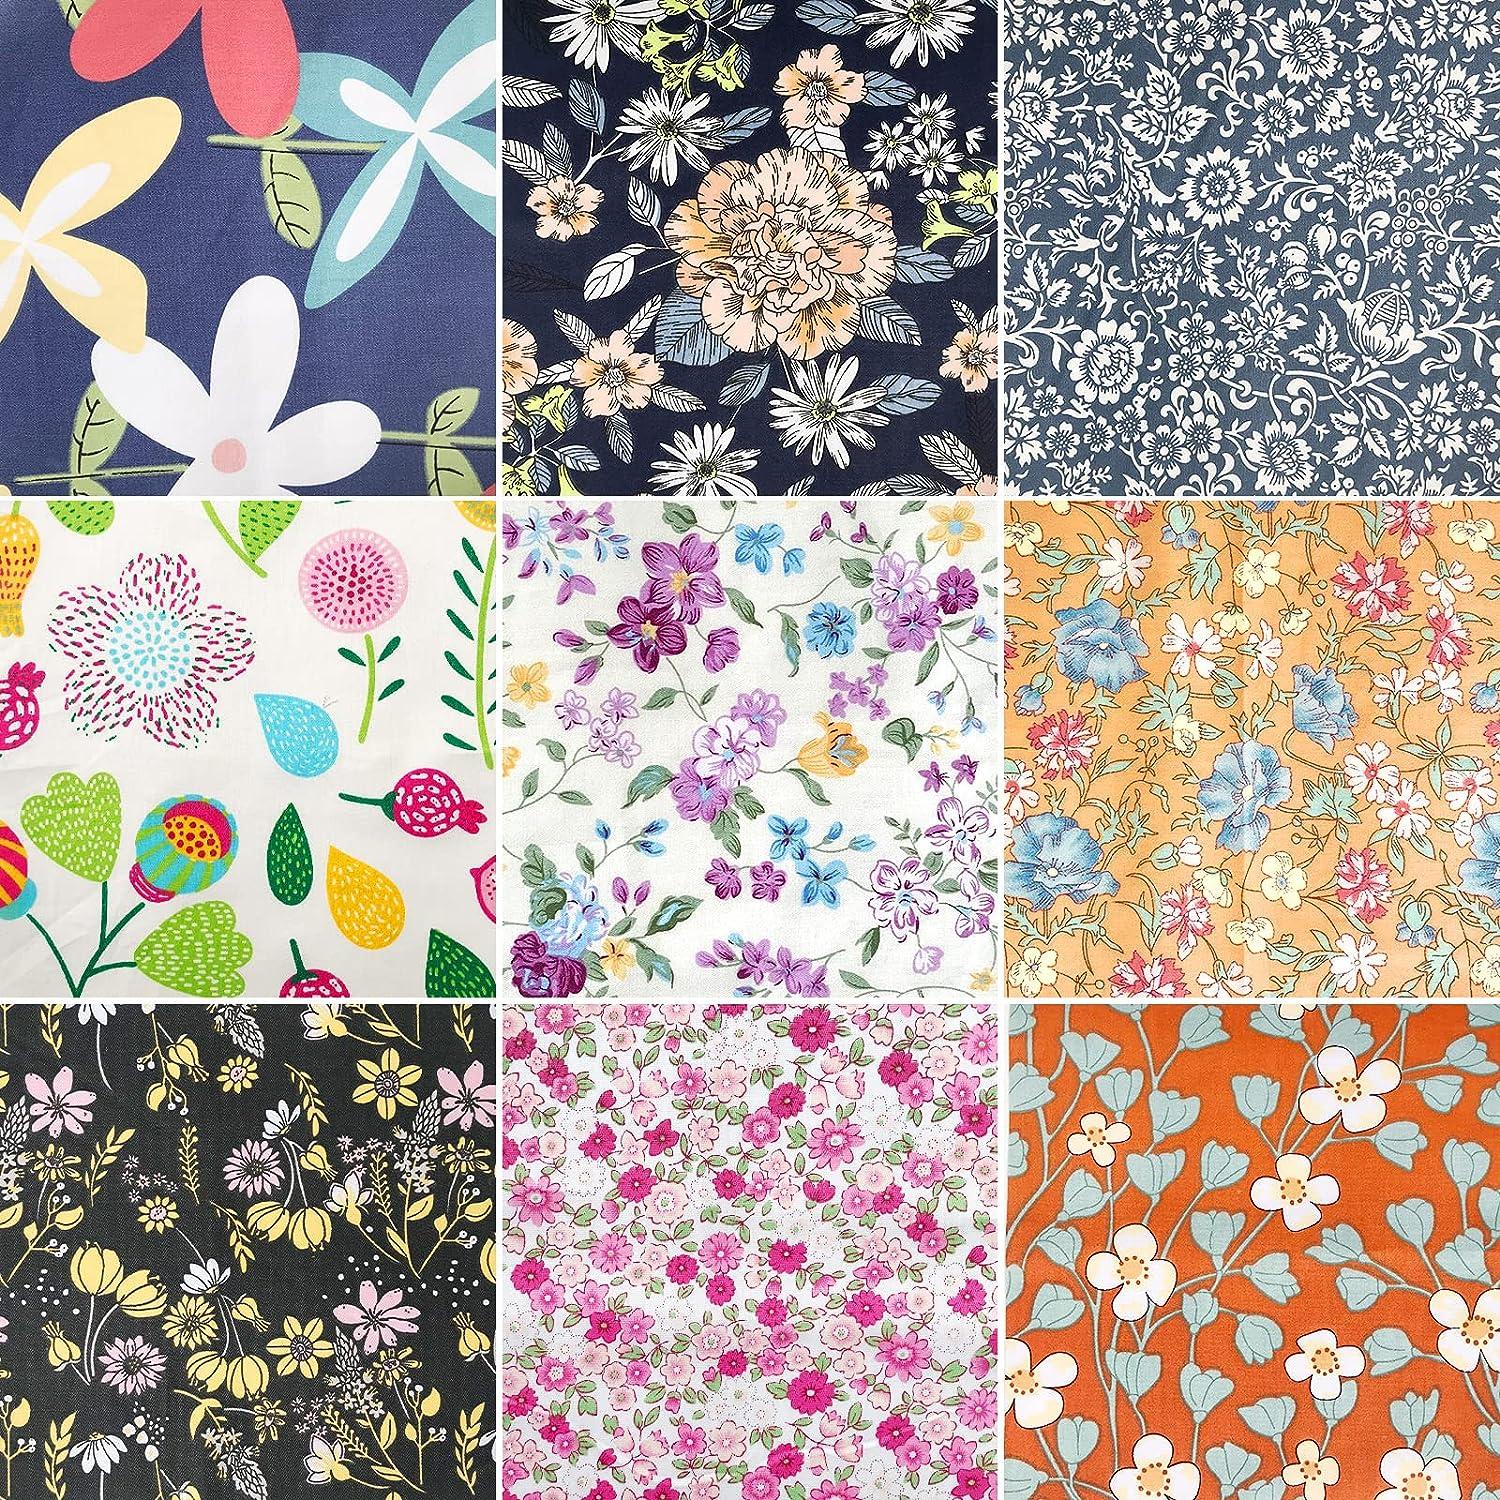 Misscrafts Cotton Quilting Fabric, 12×12-Inch